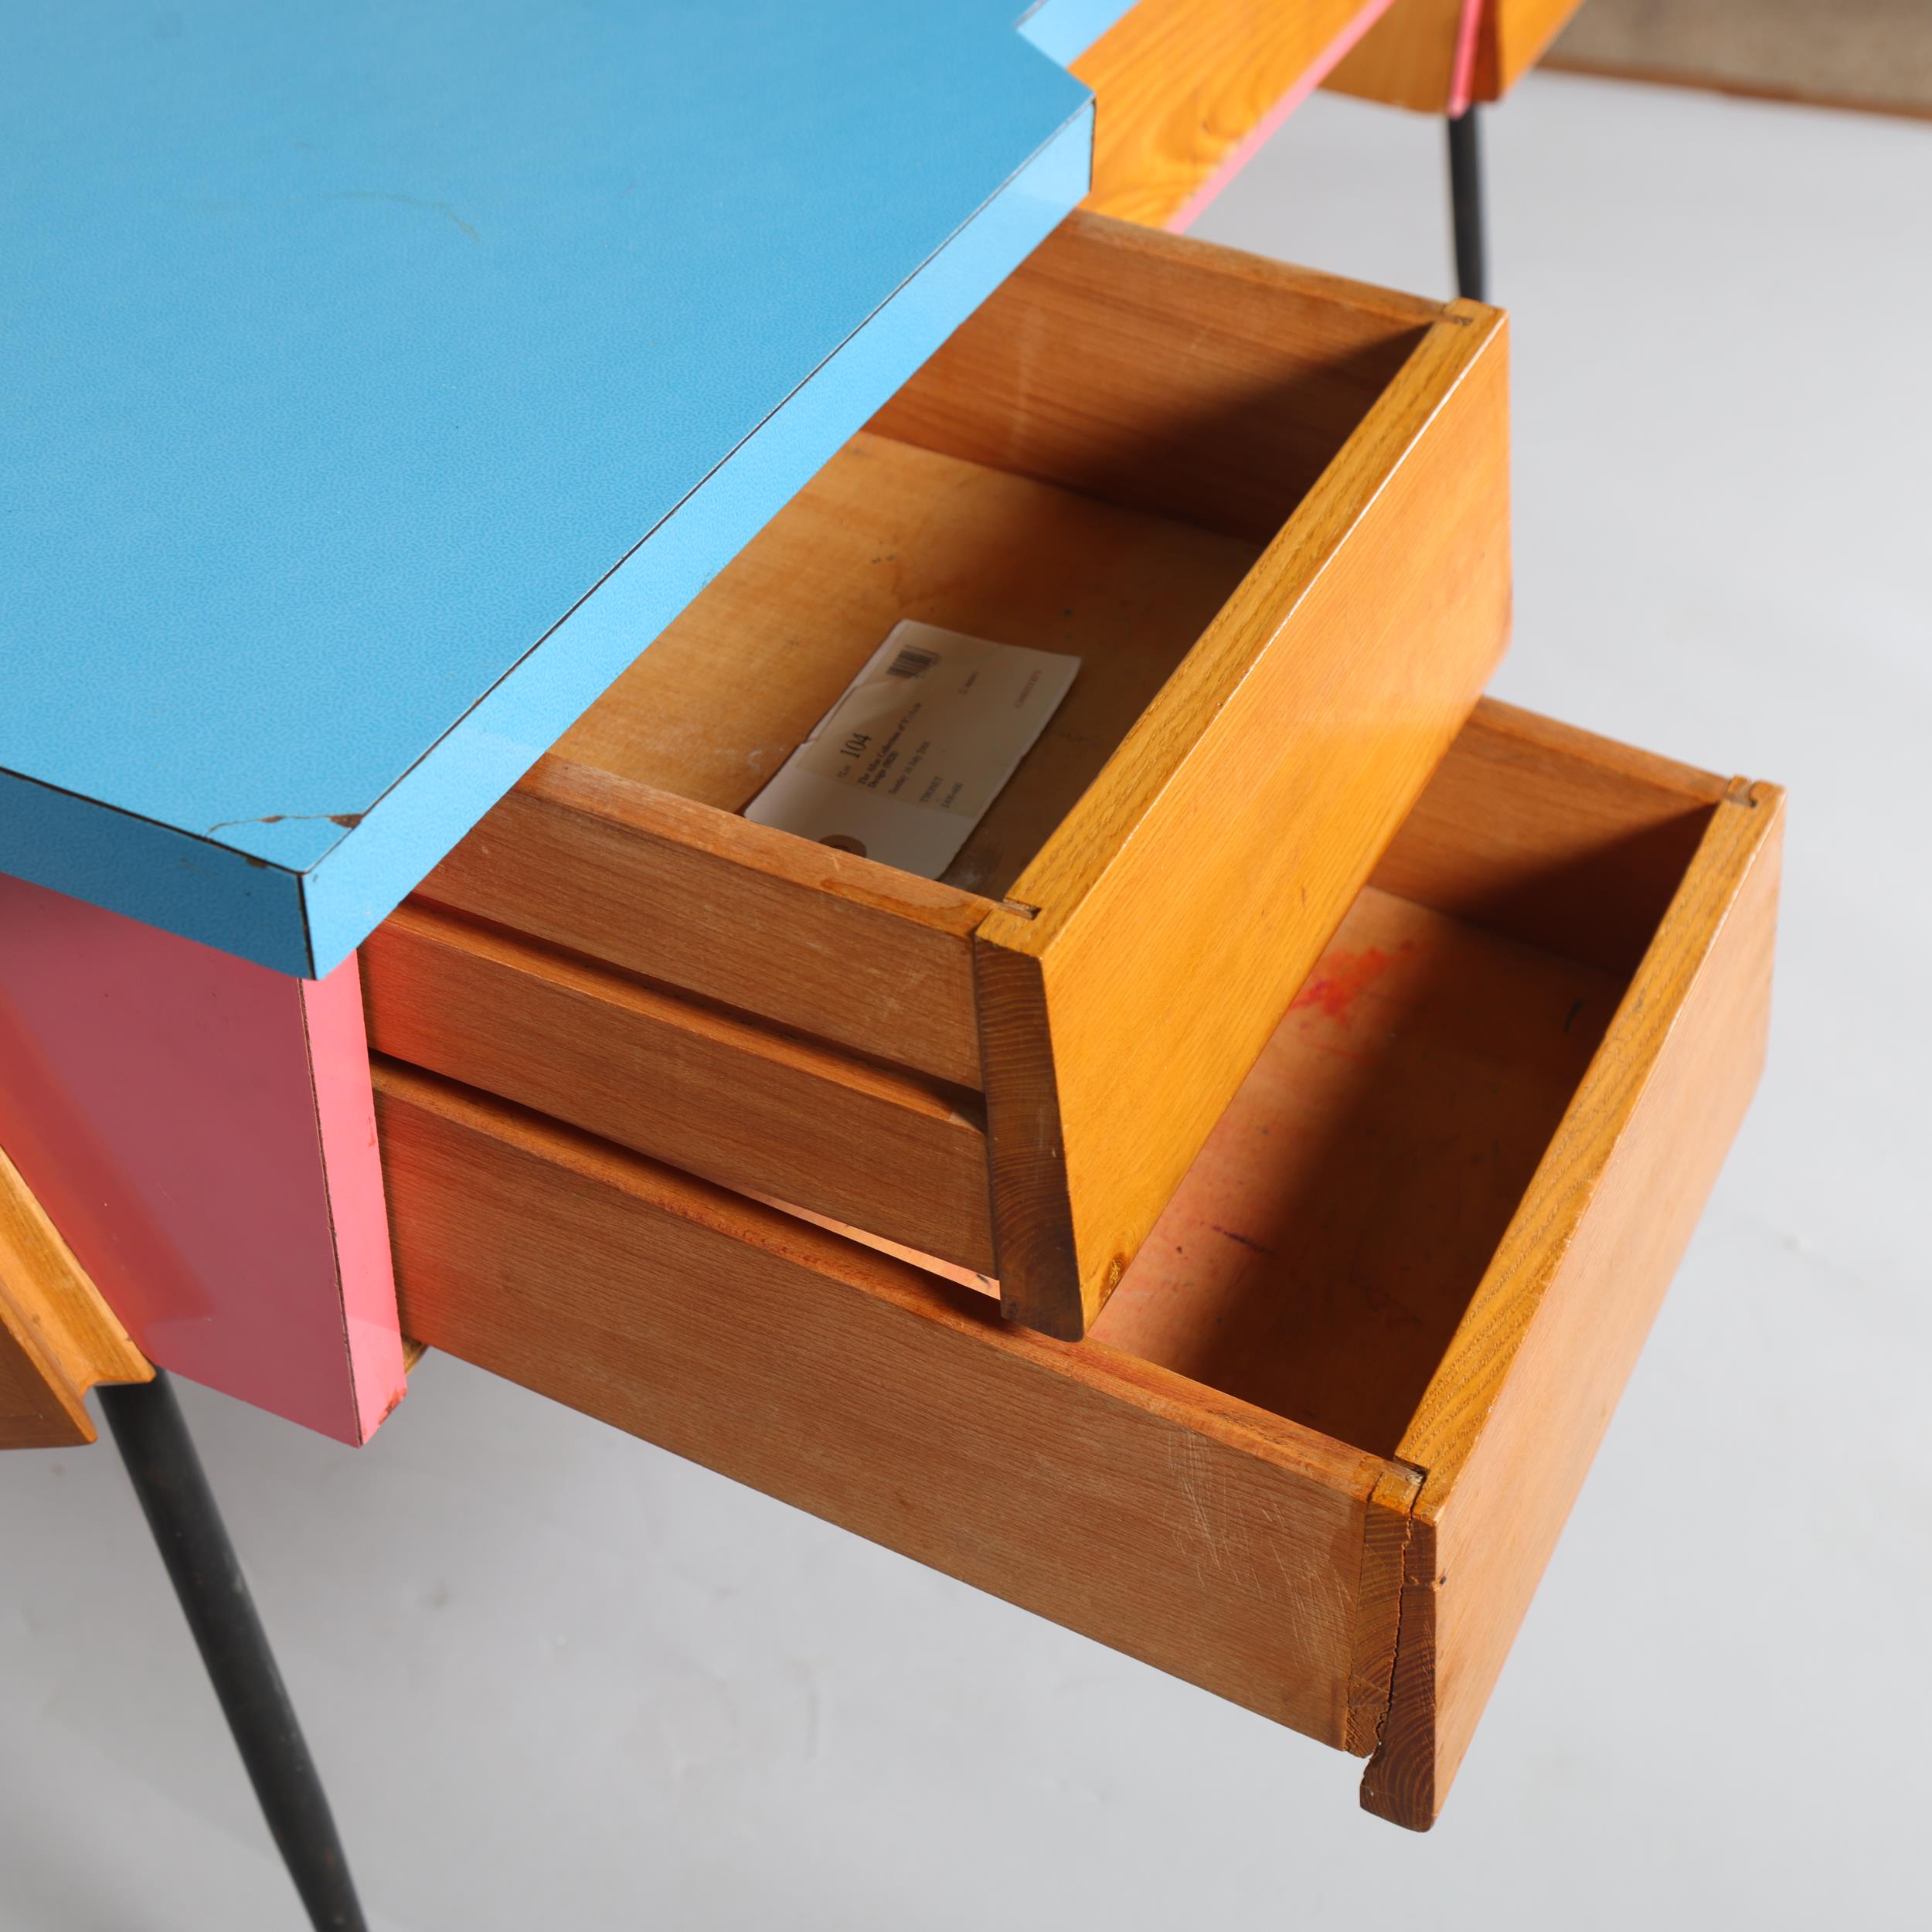 A mid 20th century Thonet desk, with beech ply body, pine fronted drawers with solid beech interior, - Image 4 of 7